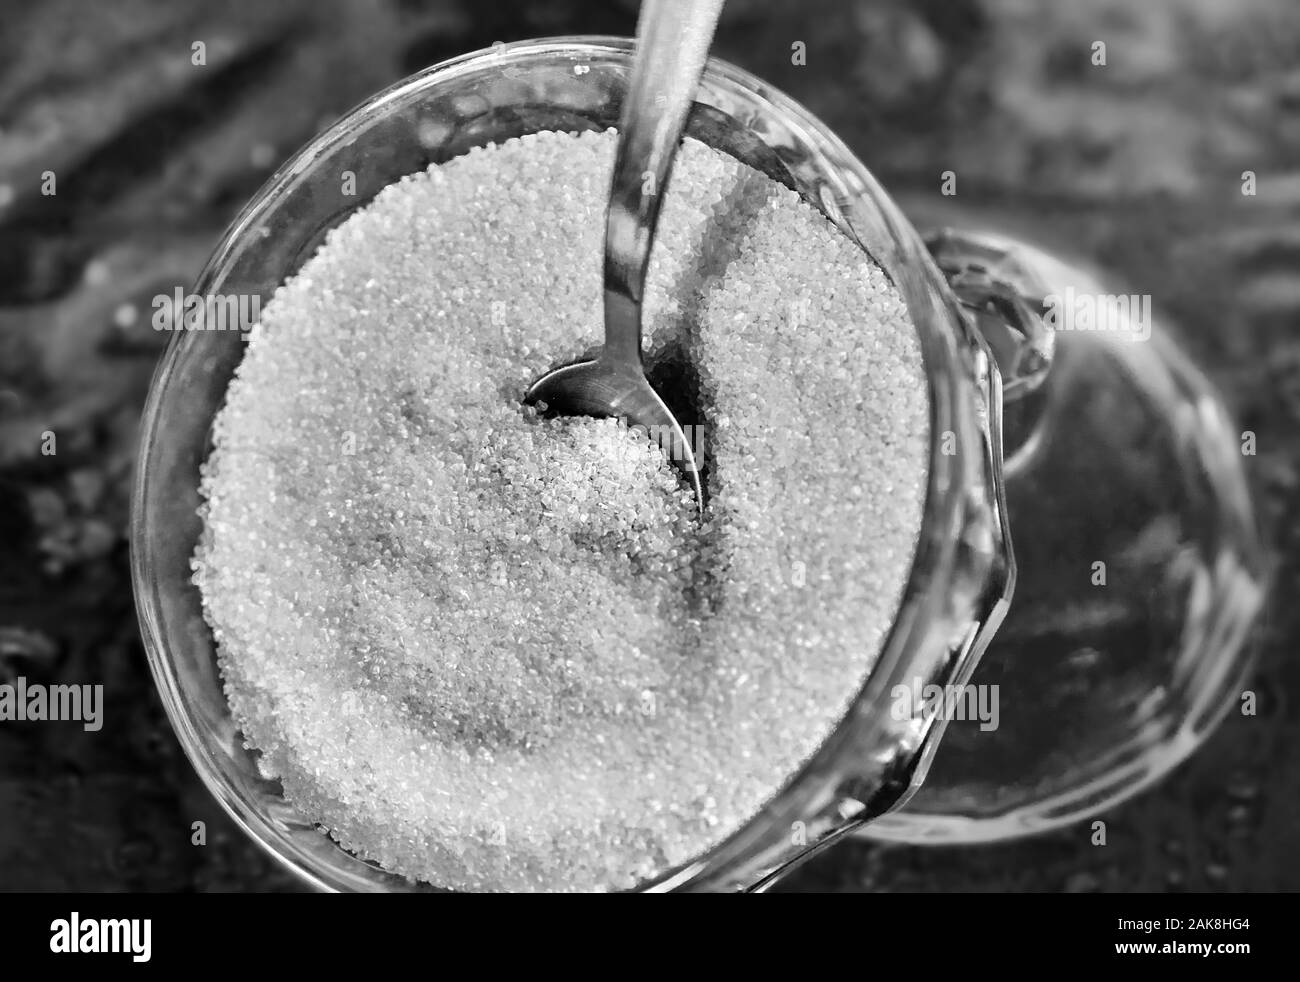 Glass bowl of granulated sugar with spoon on a glass table with a pattern Stock Photo